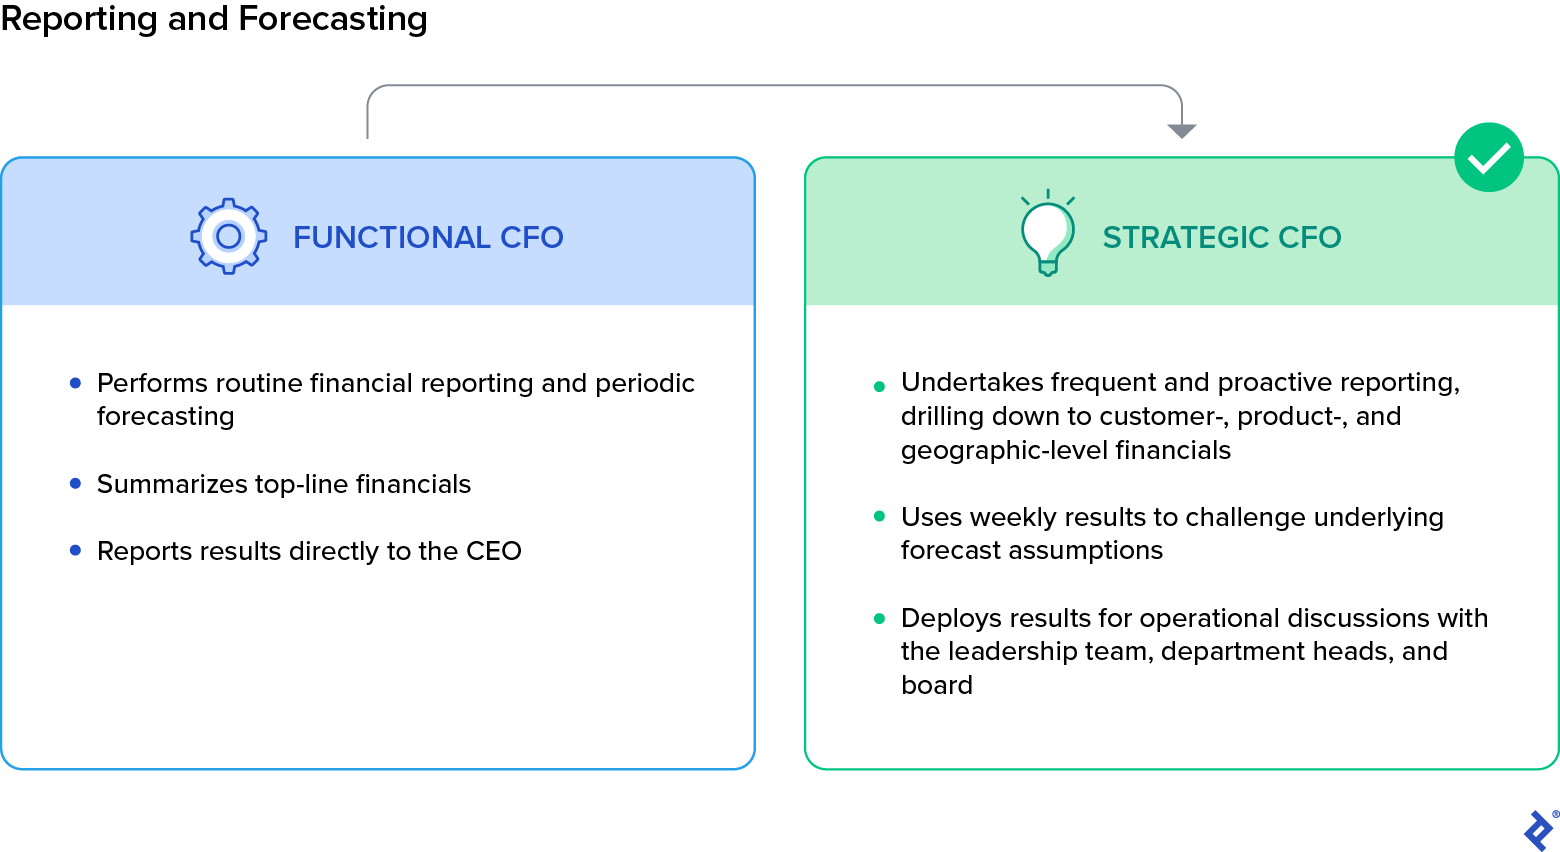 The functional CFO performs routine reporting and forecasting, summarizes top-line financials, and reports results directly to the CEO. The strategic CFO undertakes frequent, proactive reporting, and uses results to challenge assumptions and inform operational discussions with leaders.